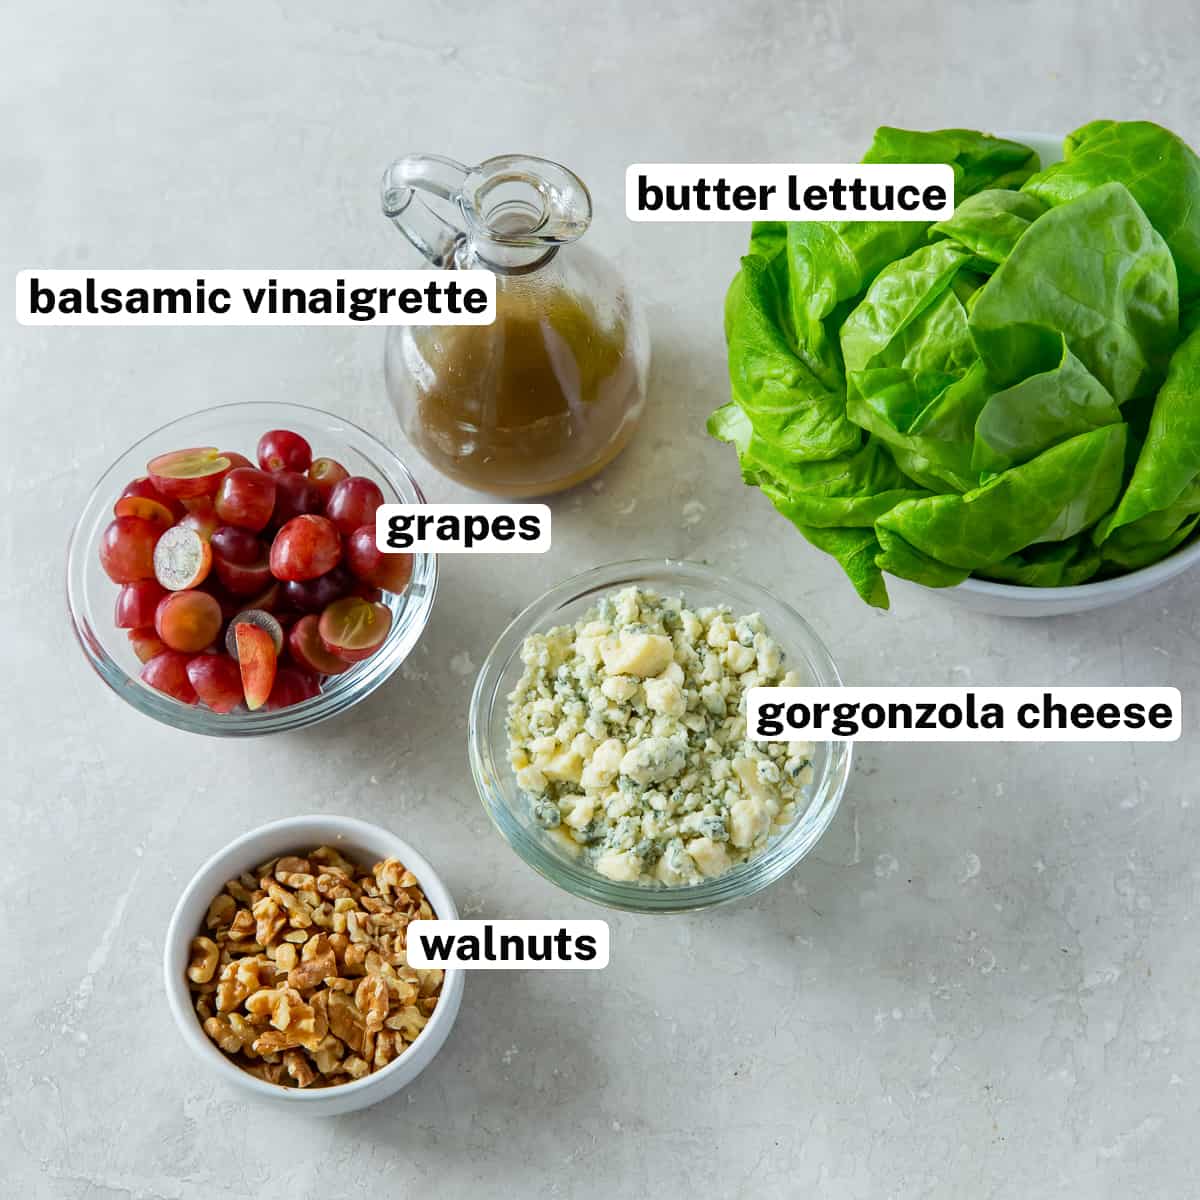 Lettuce butter, grapes, gorsonzola, walnuts and sauce with cover text.